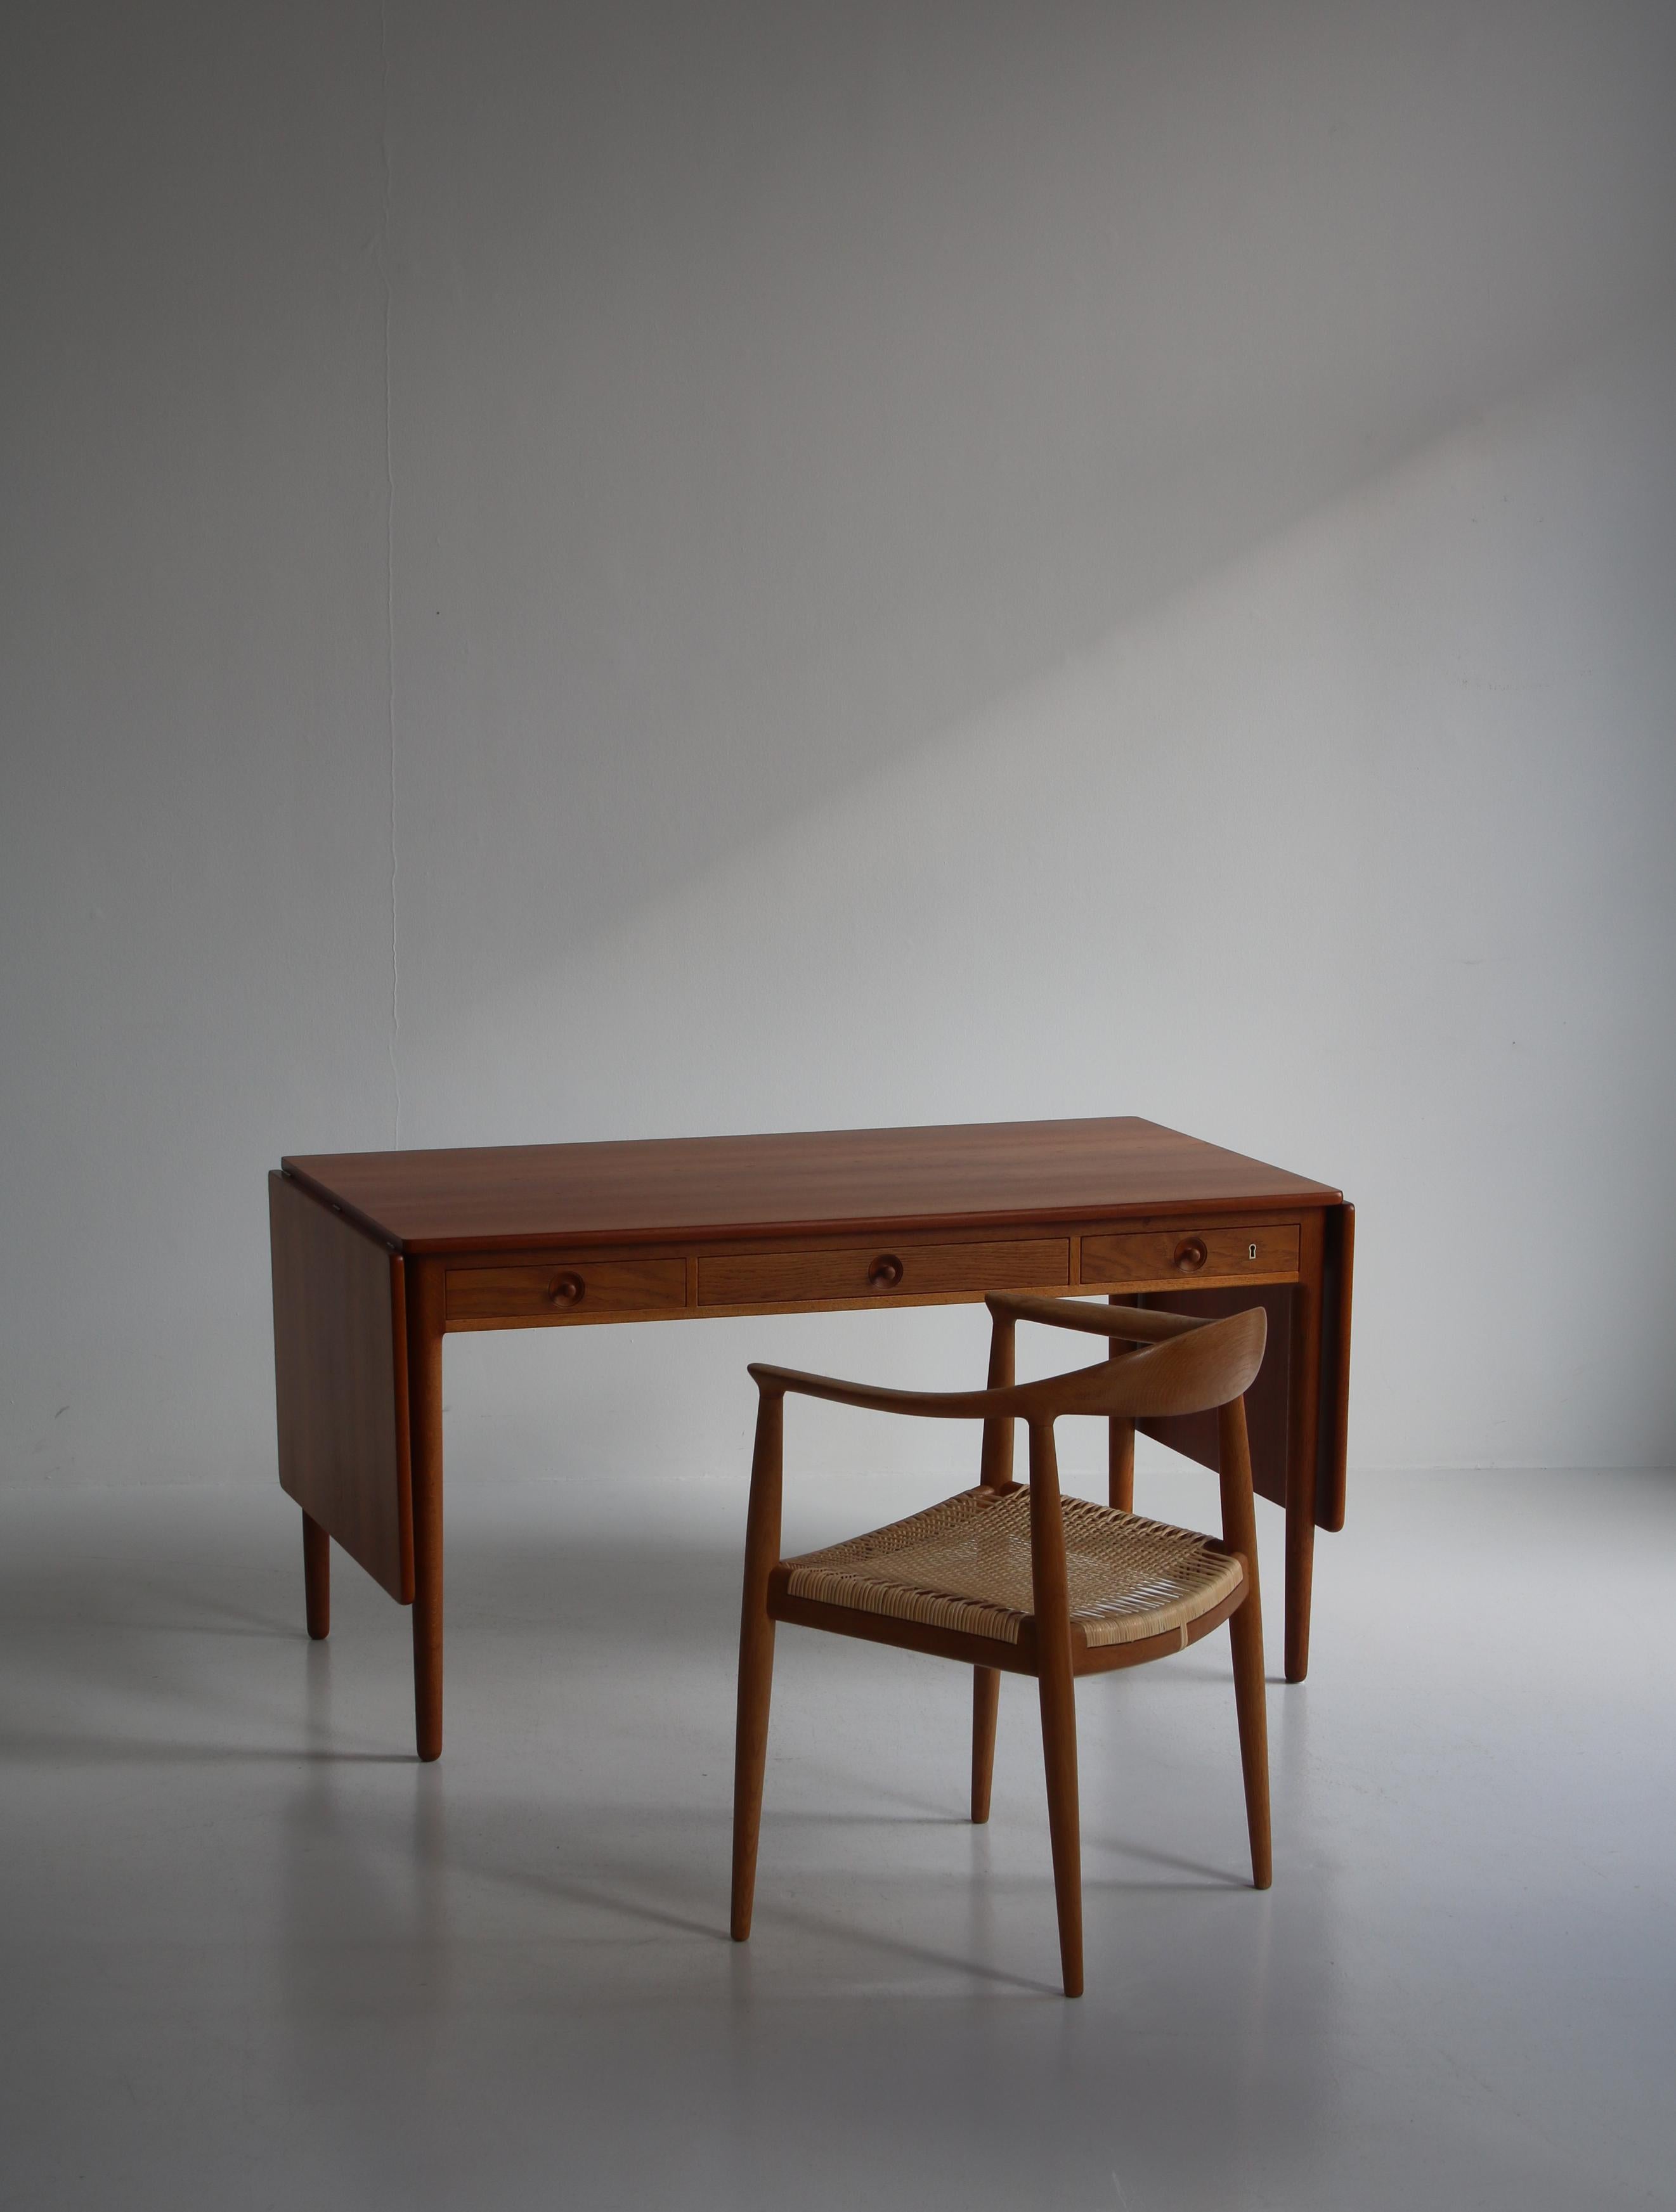 This magnificent drop-leaf table by Danish designer Hans J. Wegner can be used both as a work desk and as a dining table. The design is from 1955 and this particular table is from the early and original production by cabinetmaker Andreas Tuck in the